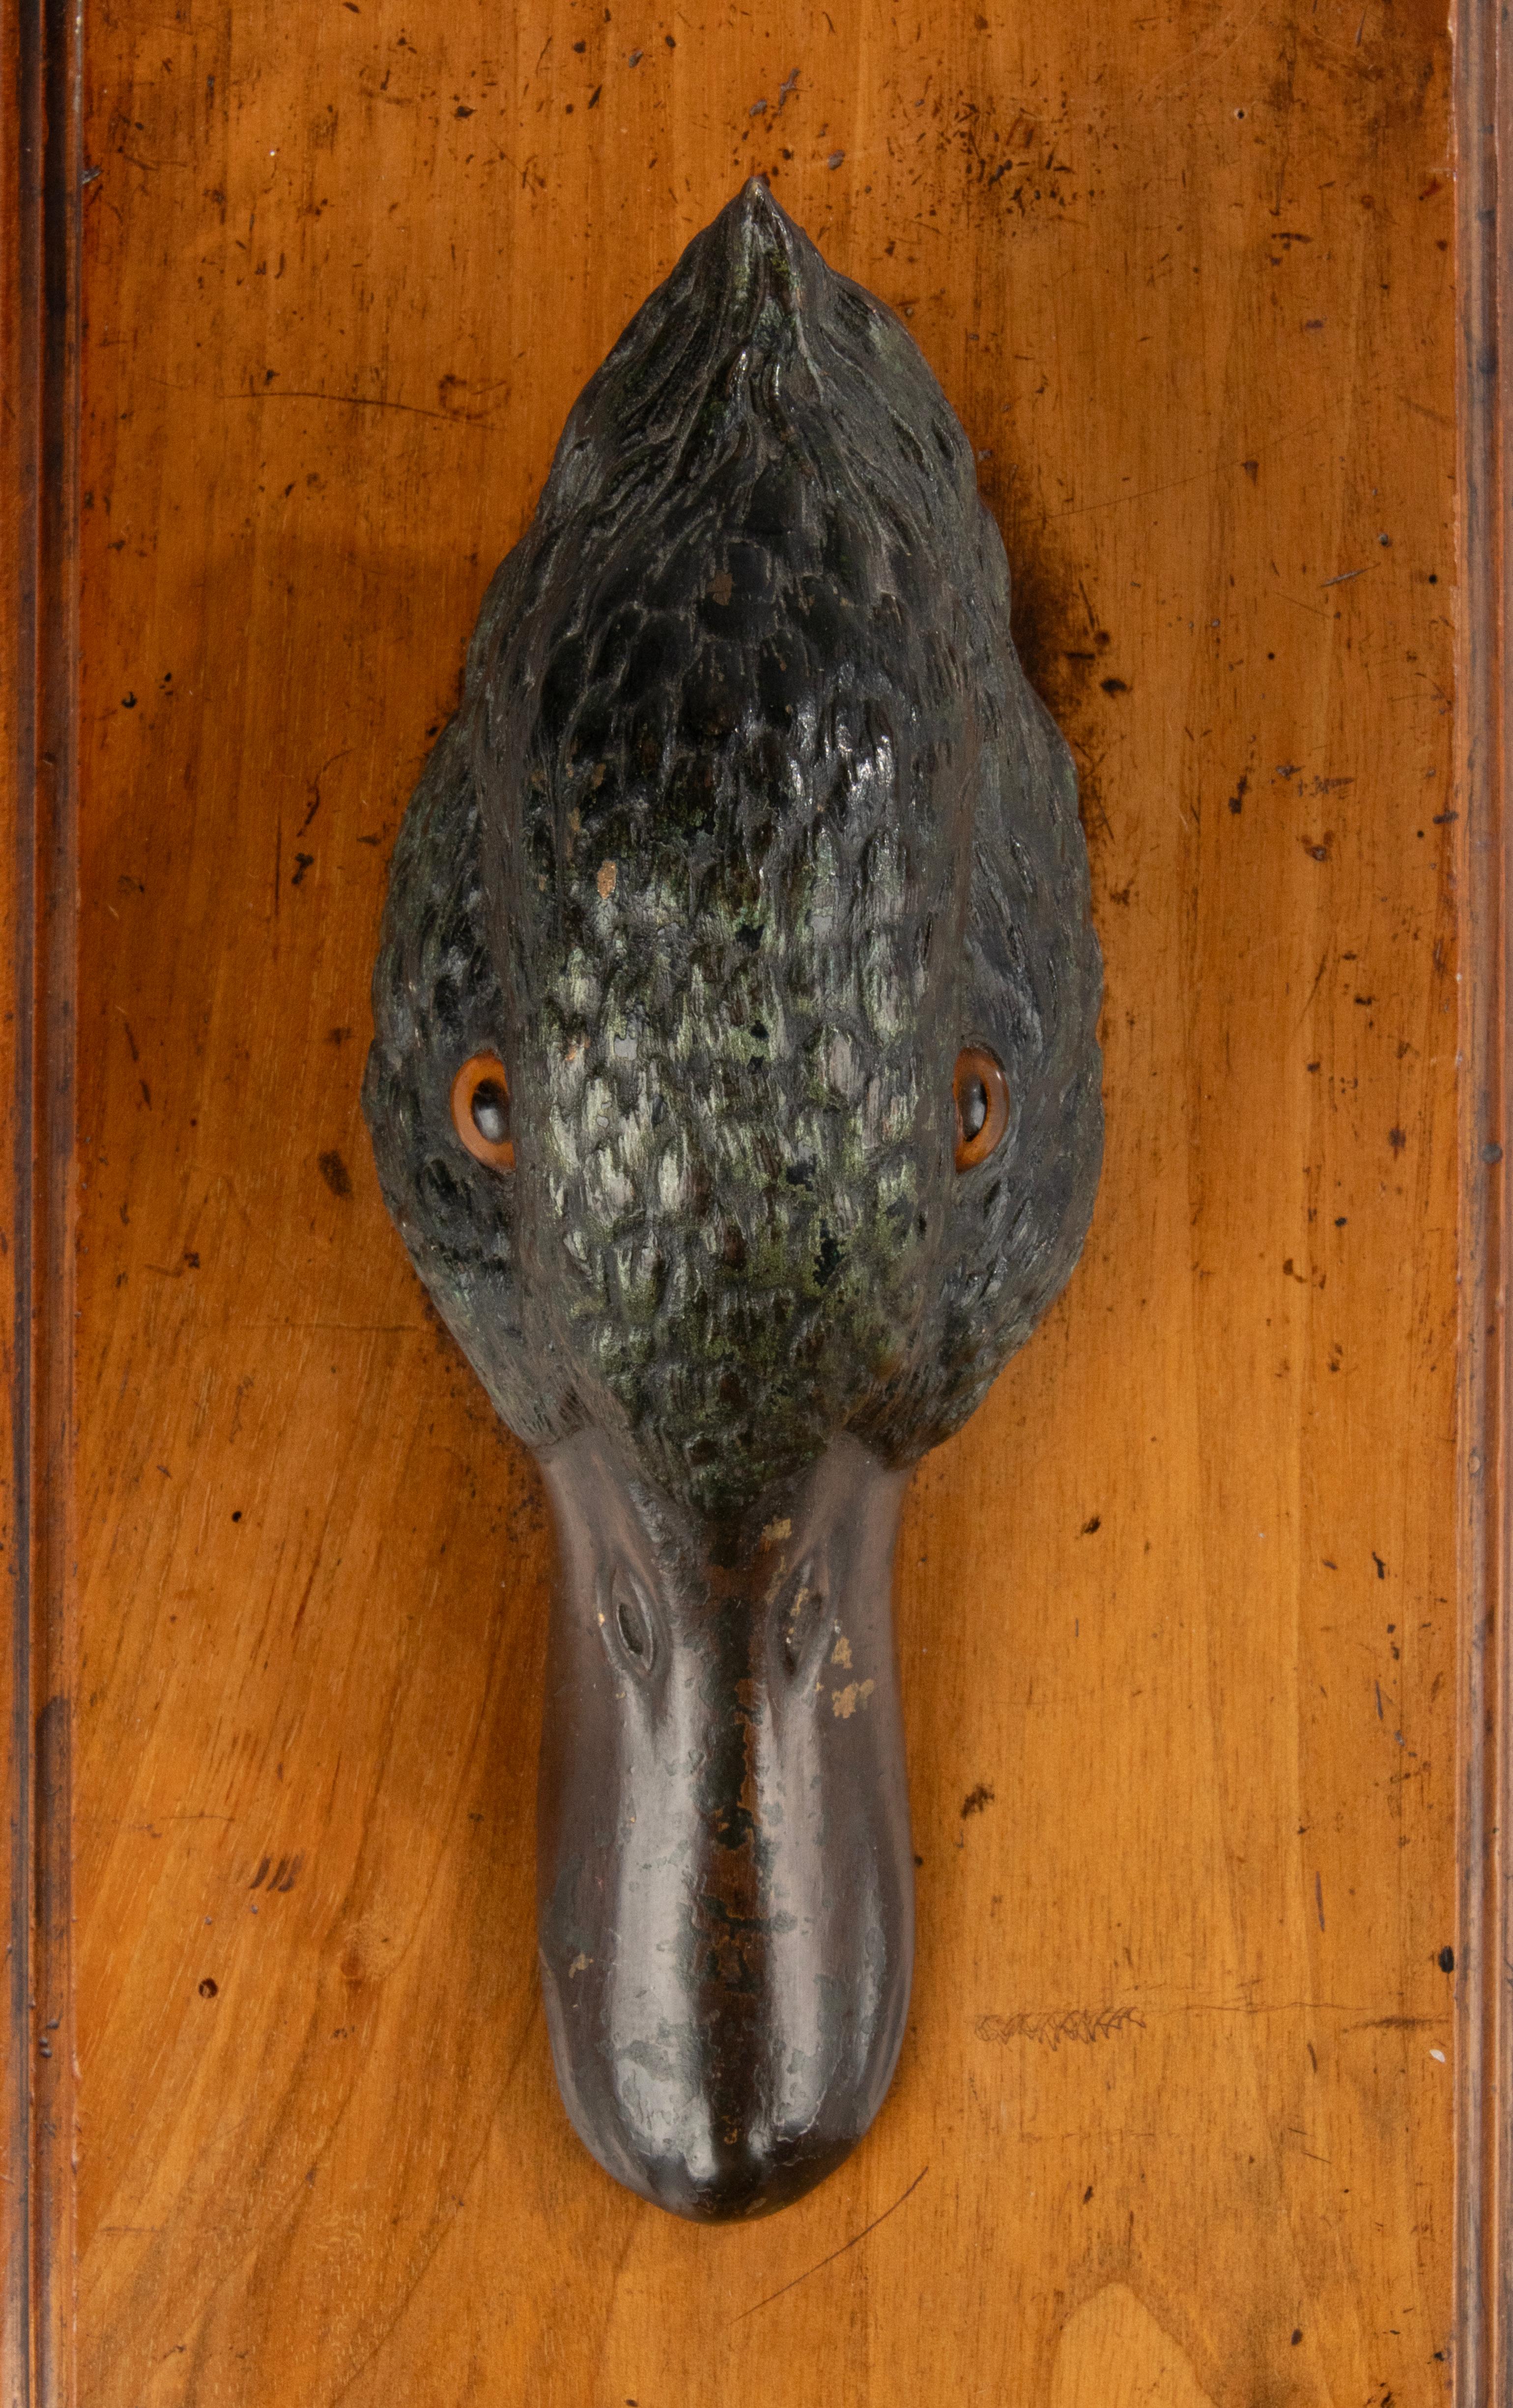 A refined bronze scuylpture of a duck head, functional as a paper clip. Made on a walnut plate. The spring of the clip is in working order.
Vienna bronze. Refined and realistic. In the style of Franz Bergmann. 

Dimensions: 26 (h) x 13 x 7 cm
Free